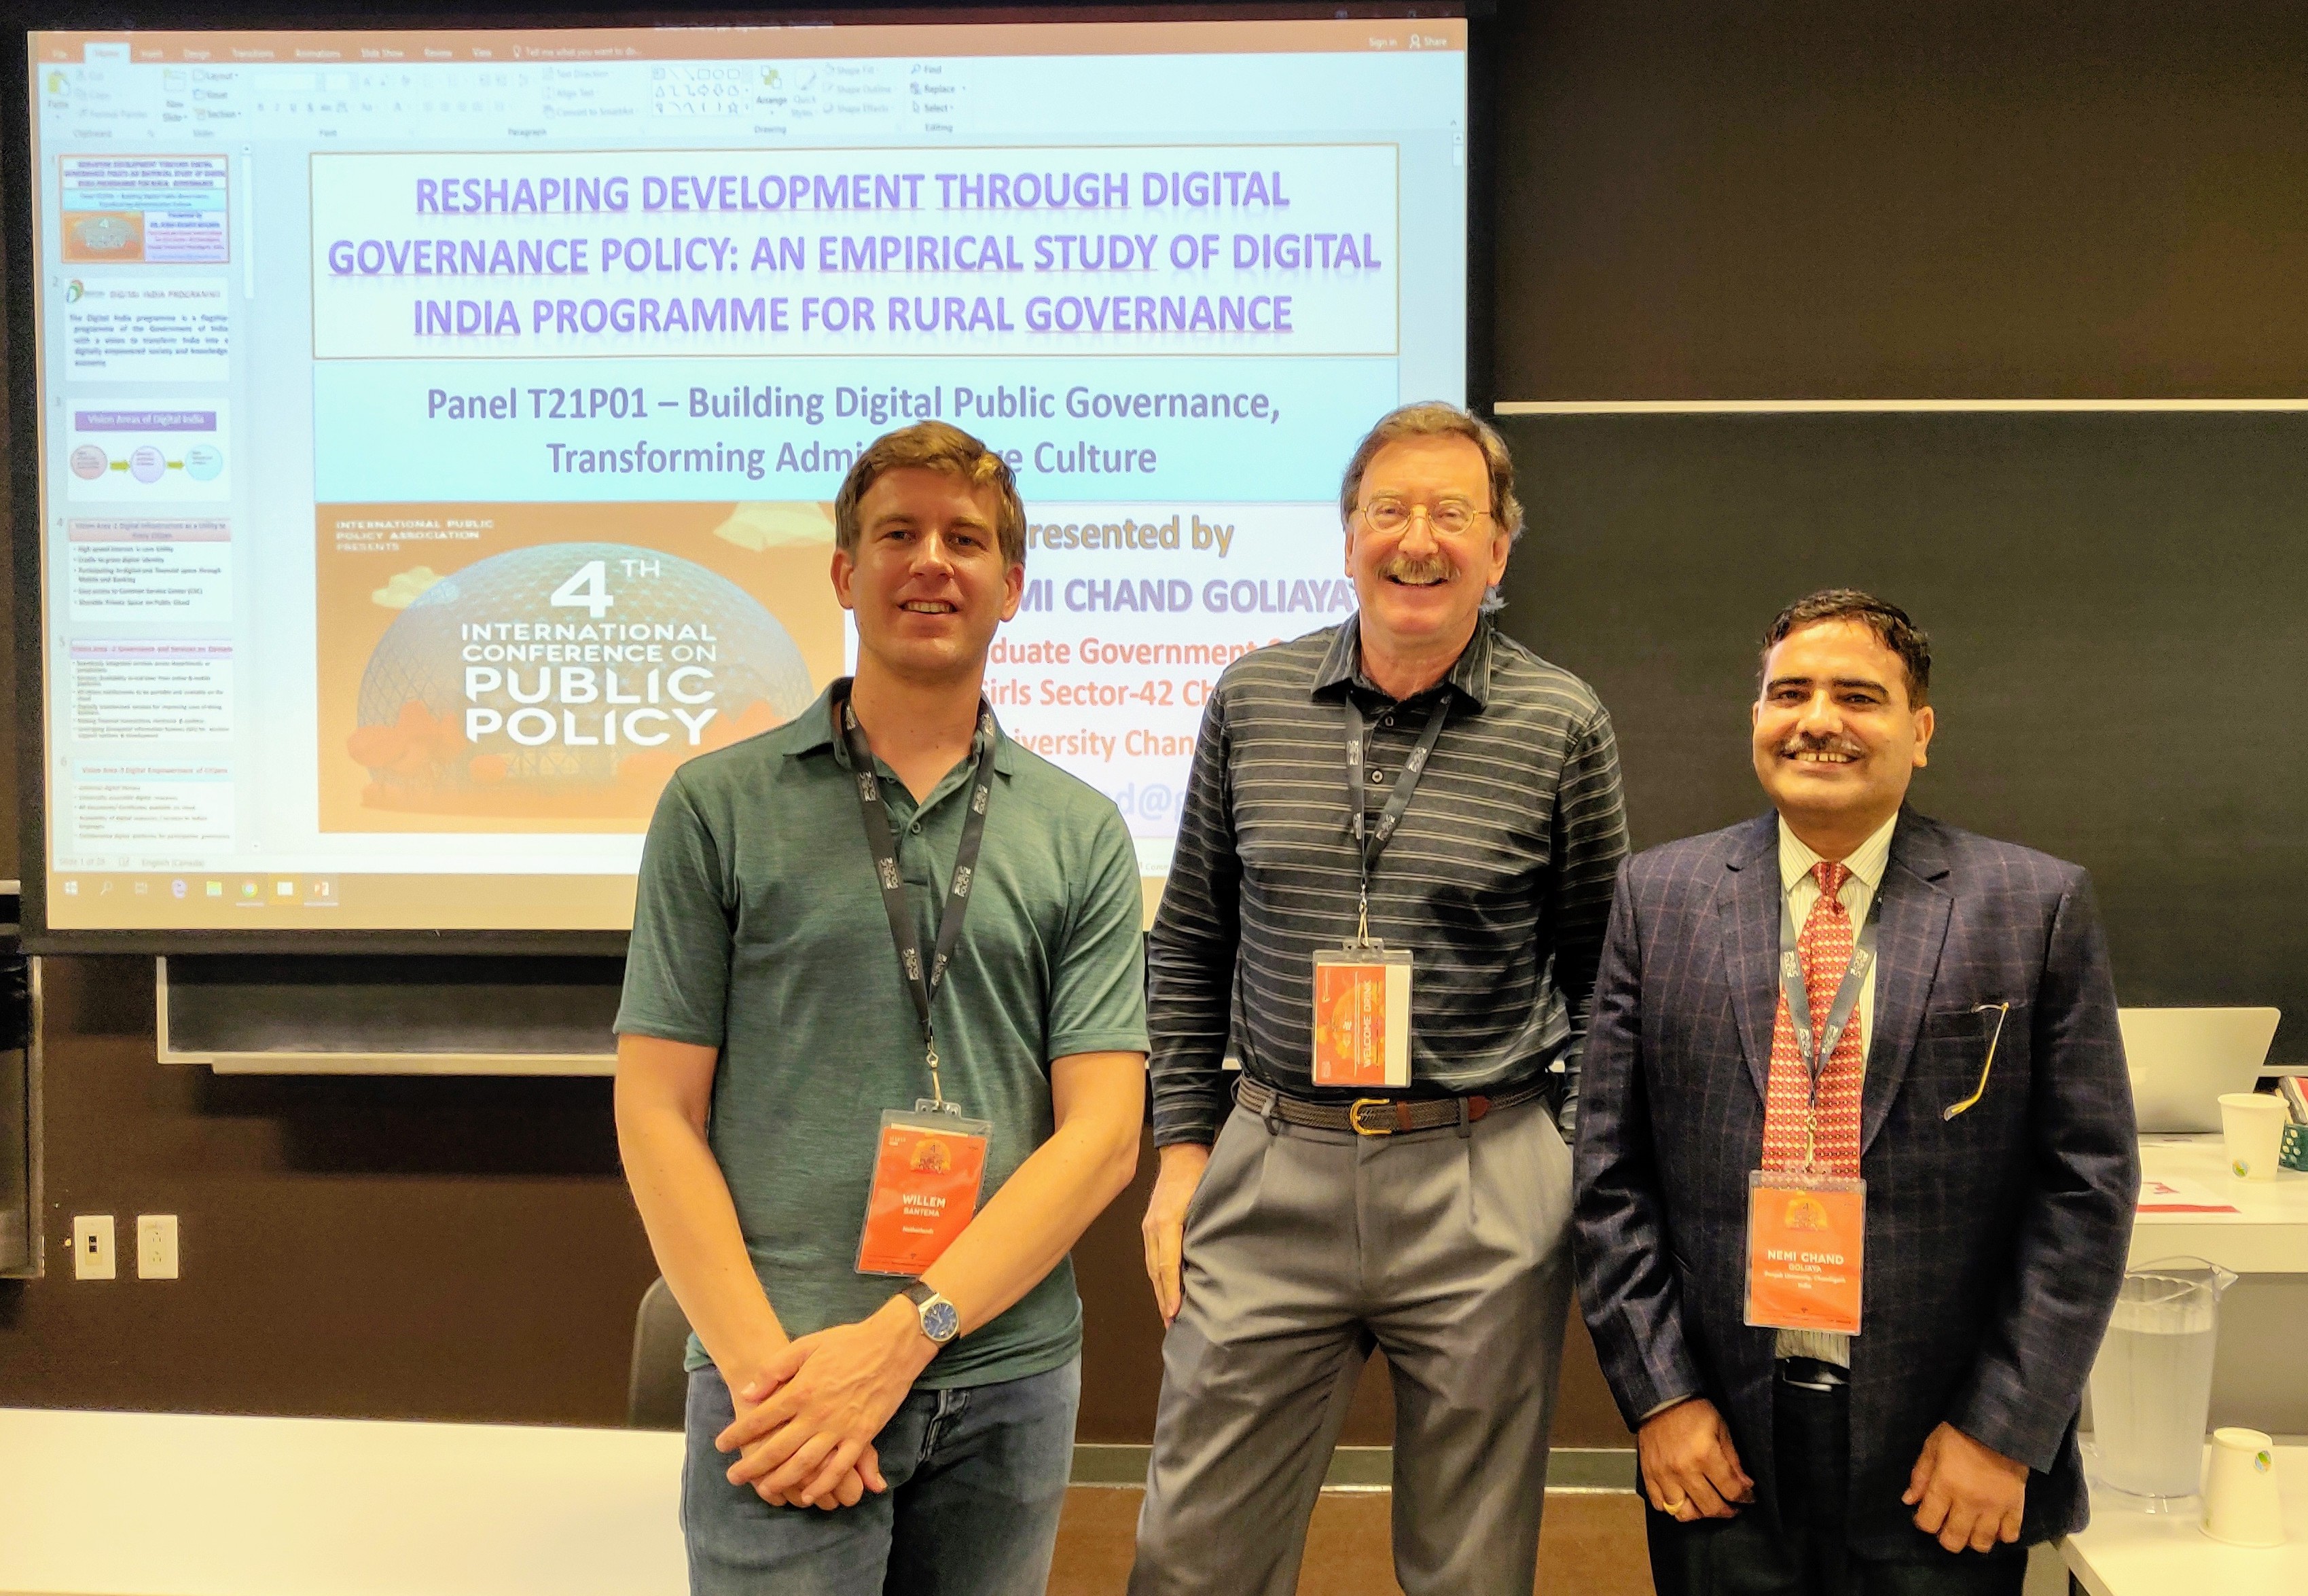 The e-governance panelists at ICPP4 2019 Montreal, Canada